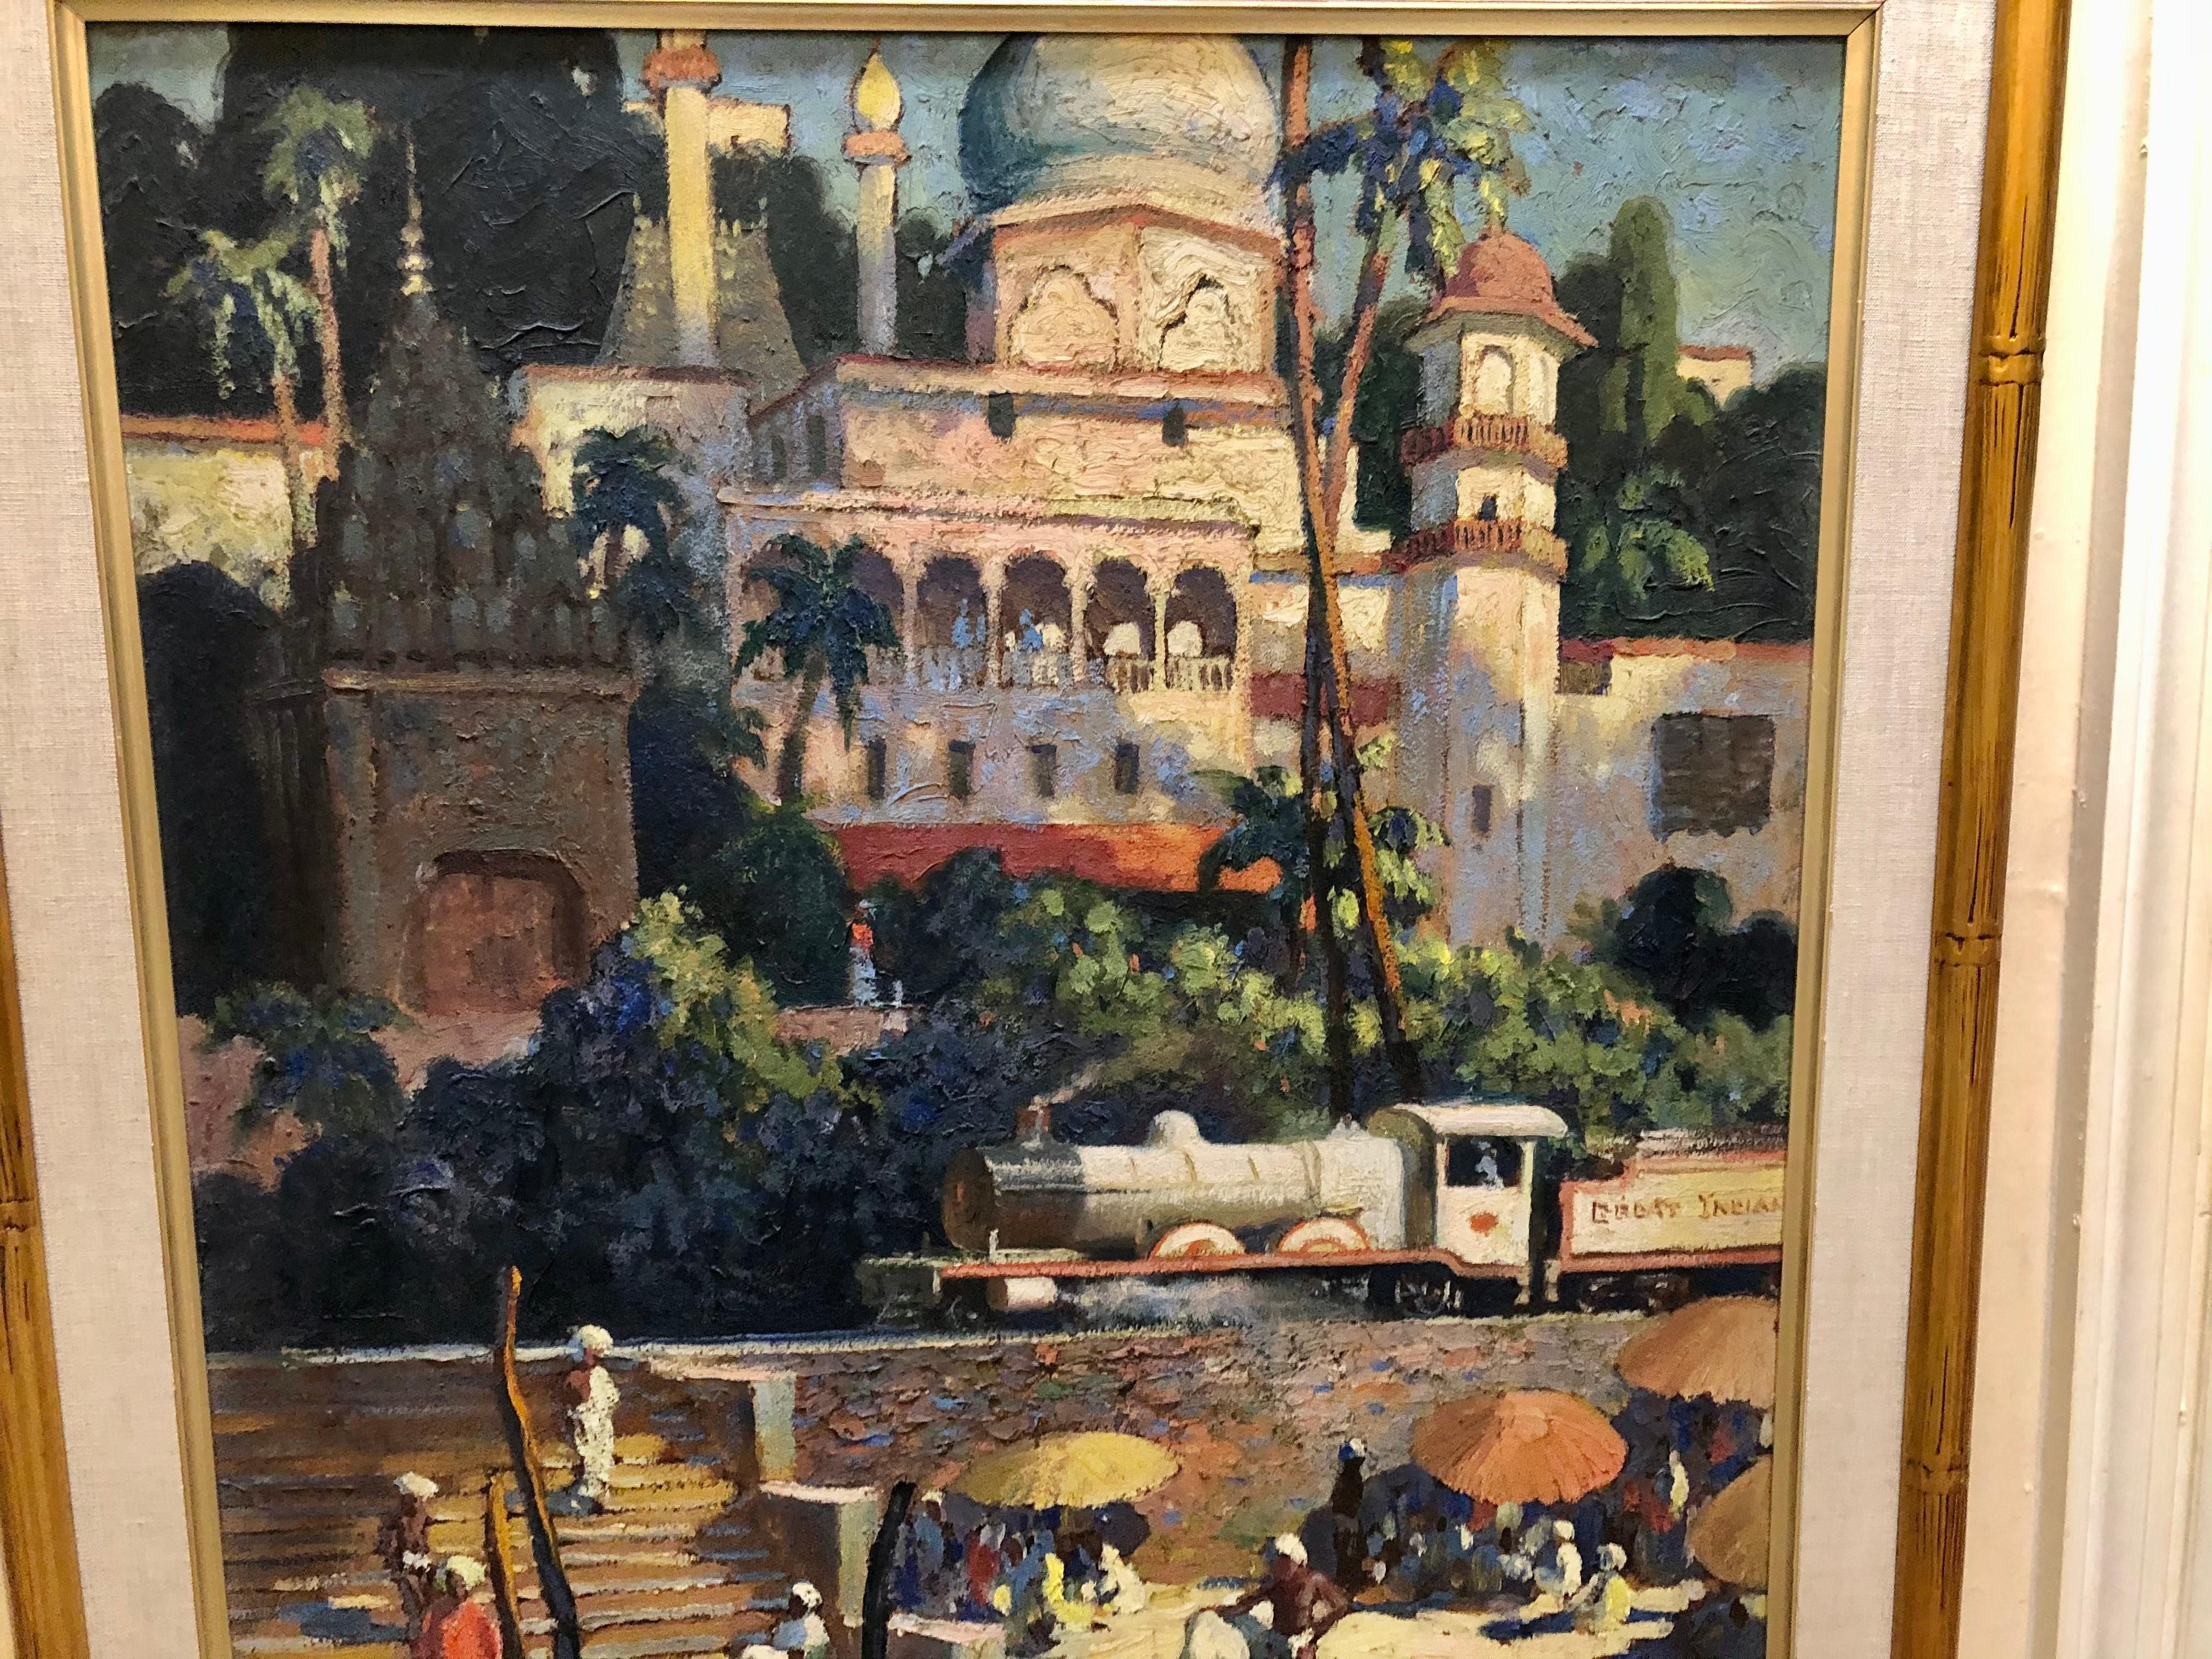 Manning de Villenueve Lee:1894-1980. Well listed American painter and illustrator with Auction records up to $22,500. This spectacular painting is one of our favorites. Probably painted in the 1930s or 40s the colors and details of an Indian scene